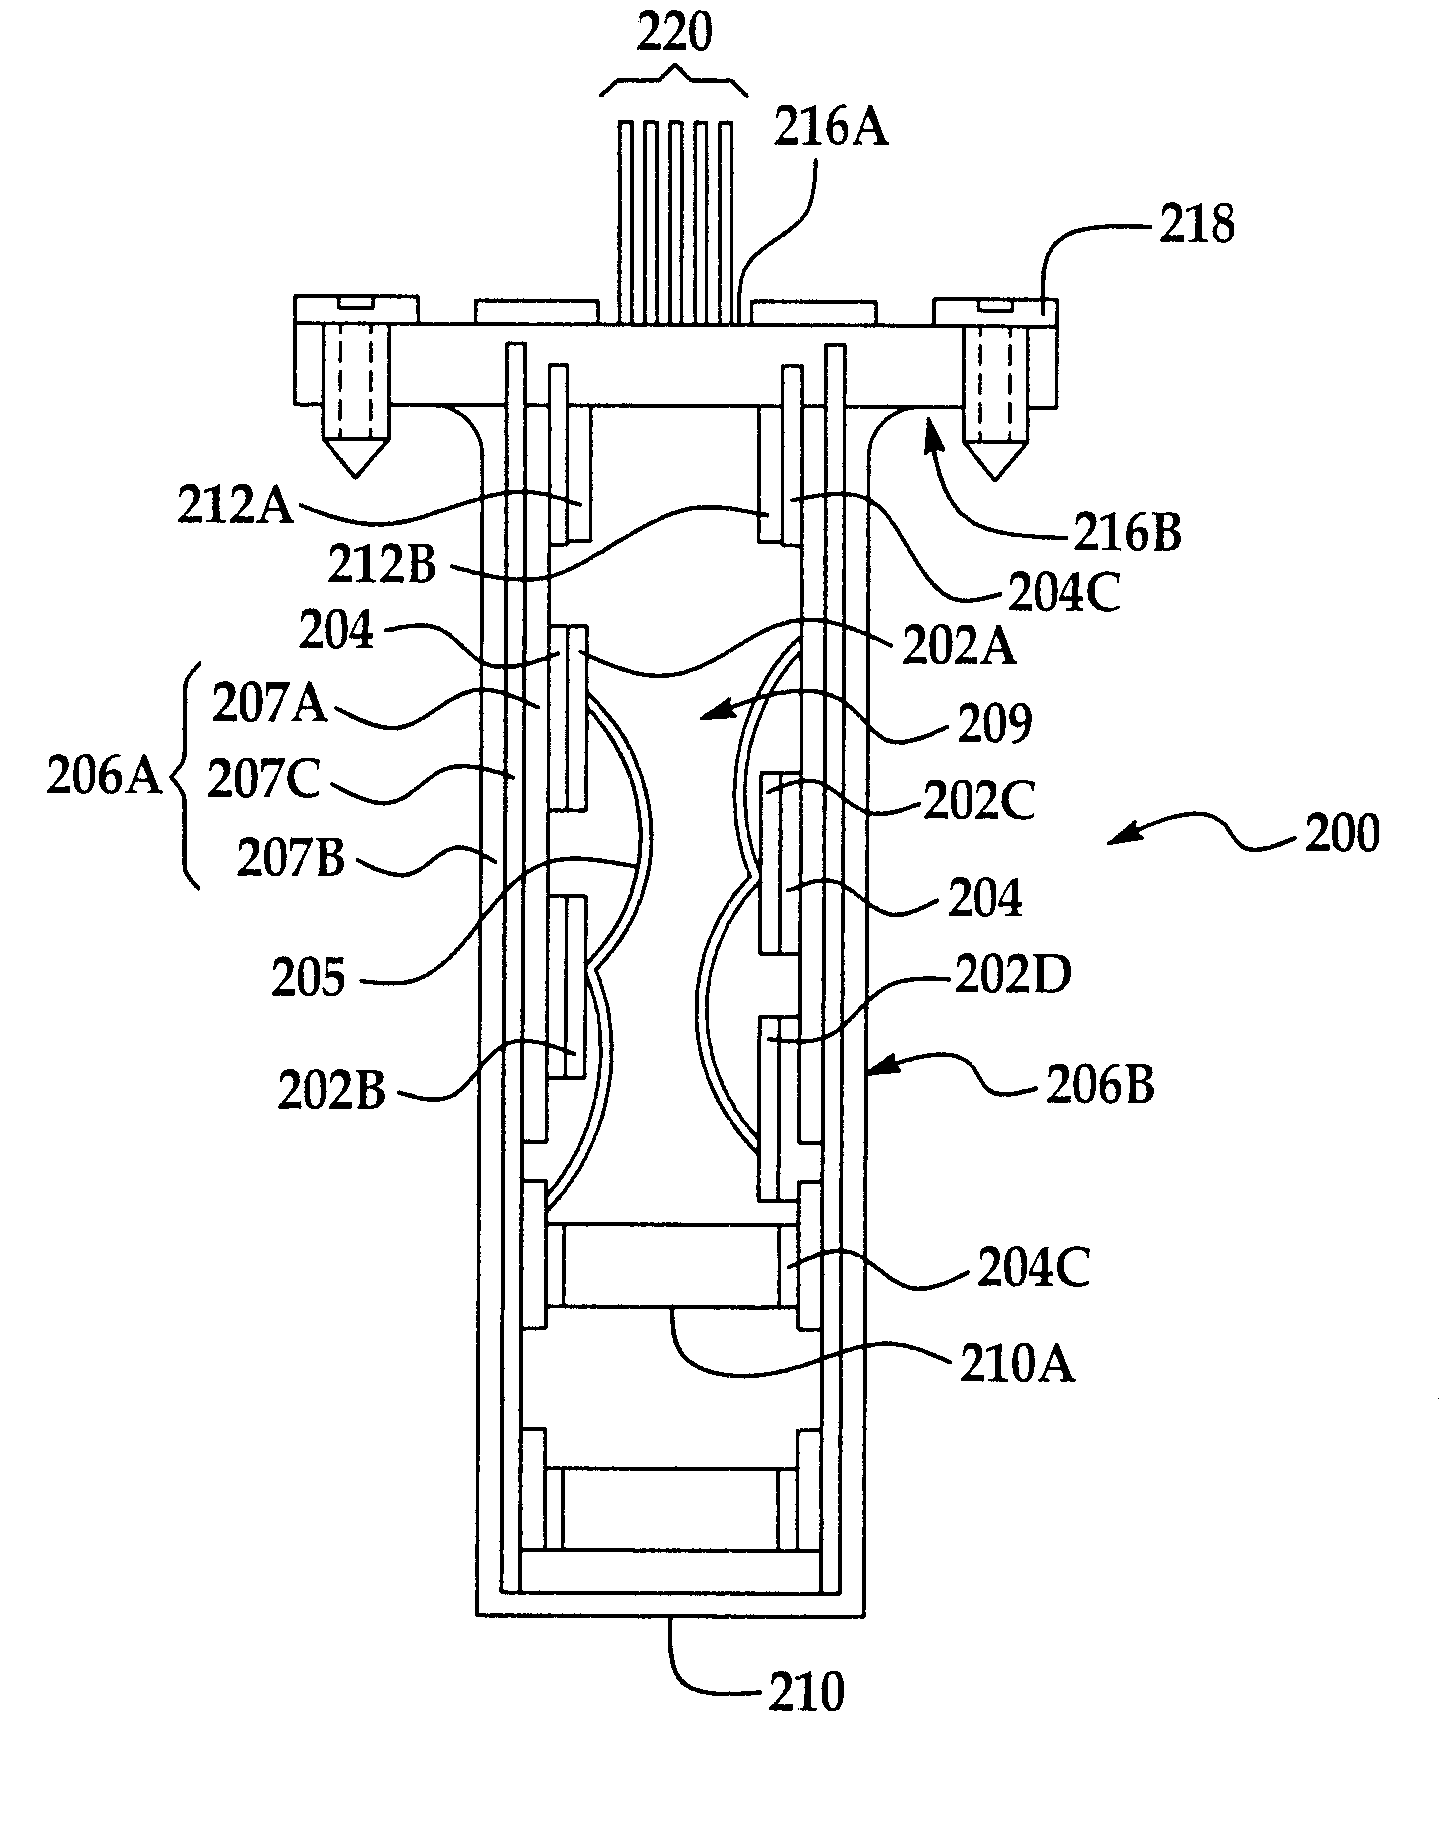 Direct dipping cooled power module and packaging